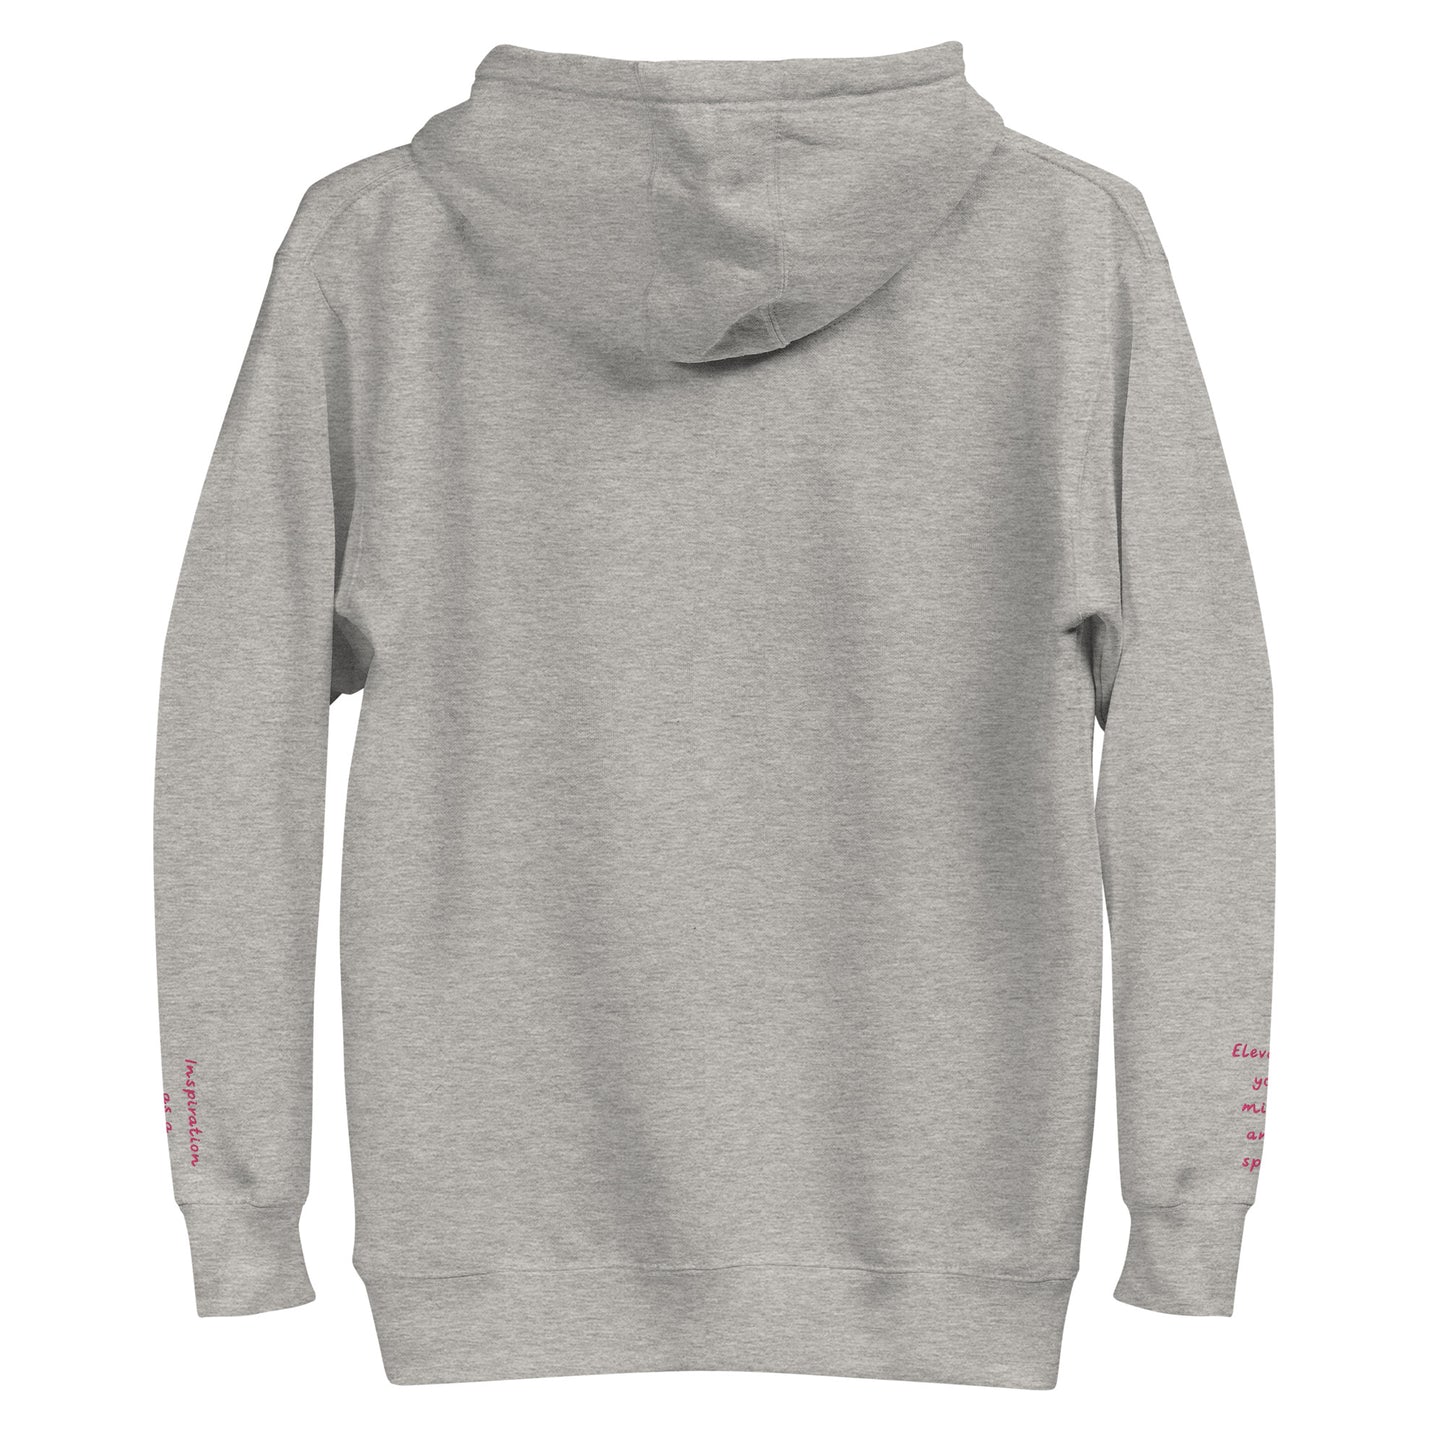 Exaltia - Classic Cotton: Women's Hoodie - Inspiration as a driving force